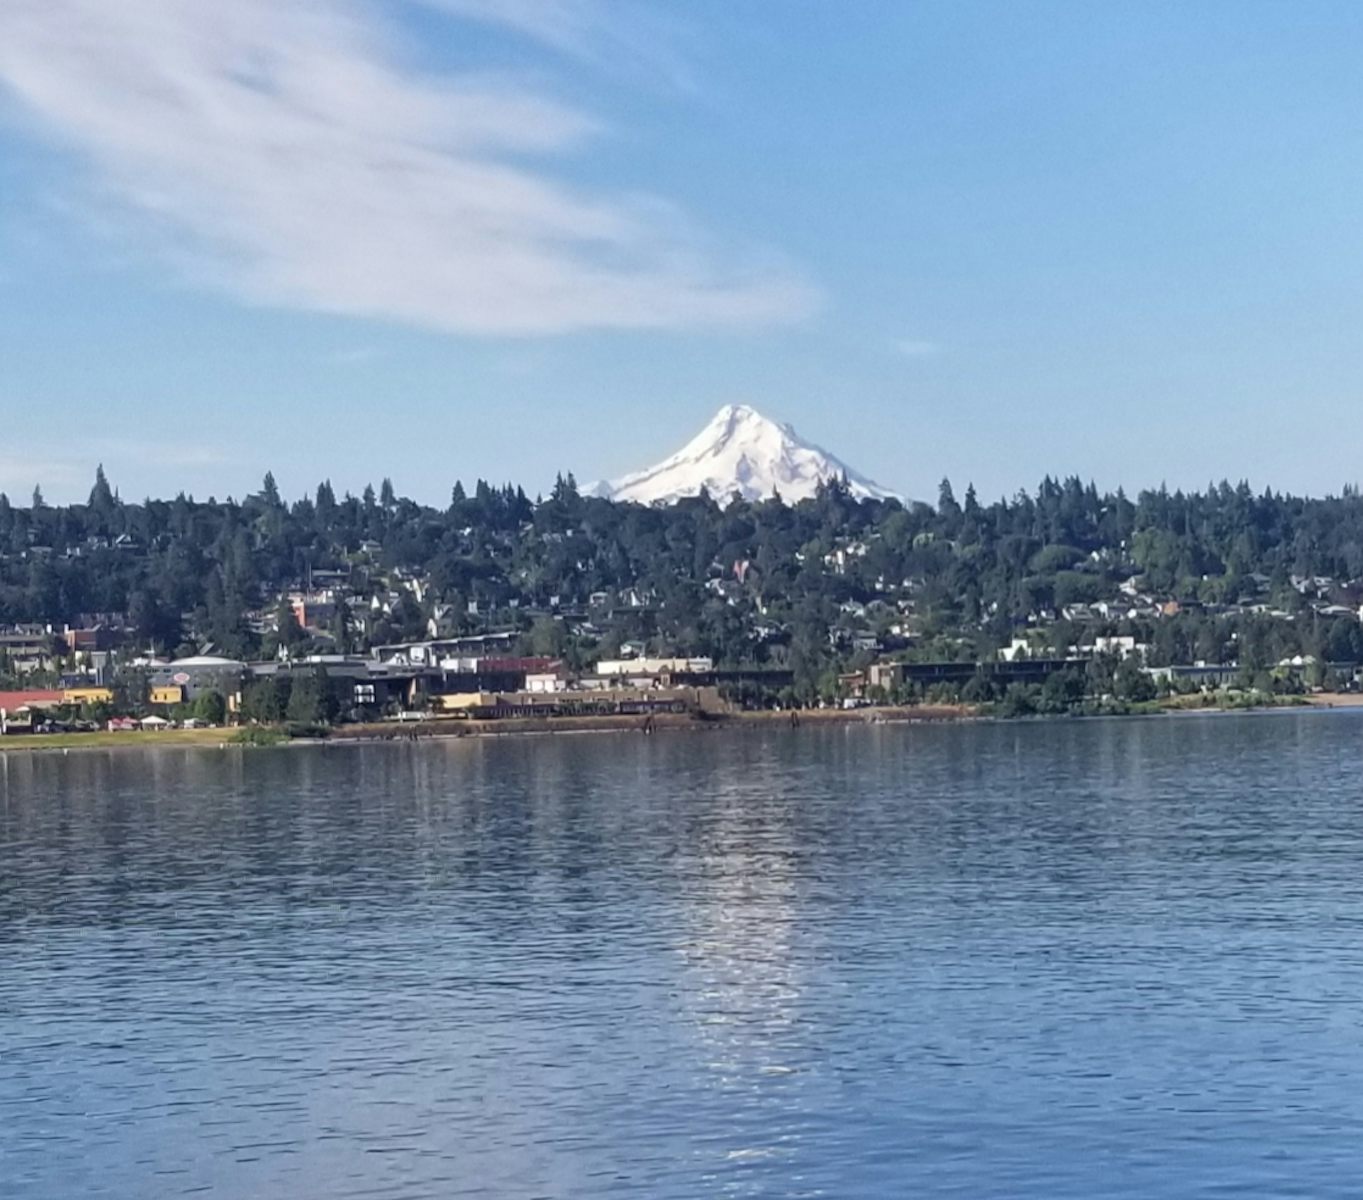 This photo was taken of Mt. Hood from our balcony as we were approaching Hood River. What an impressive view of the mountain! What an impressive town!